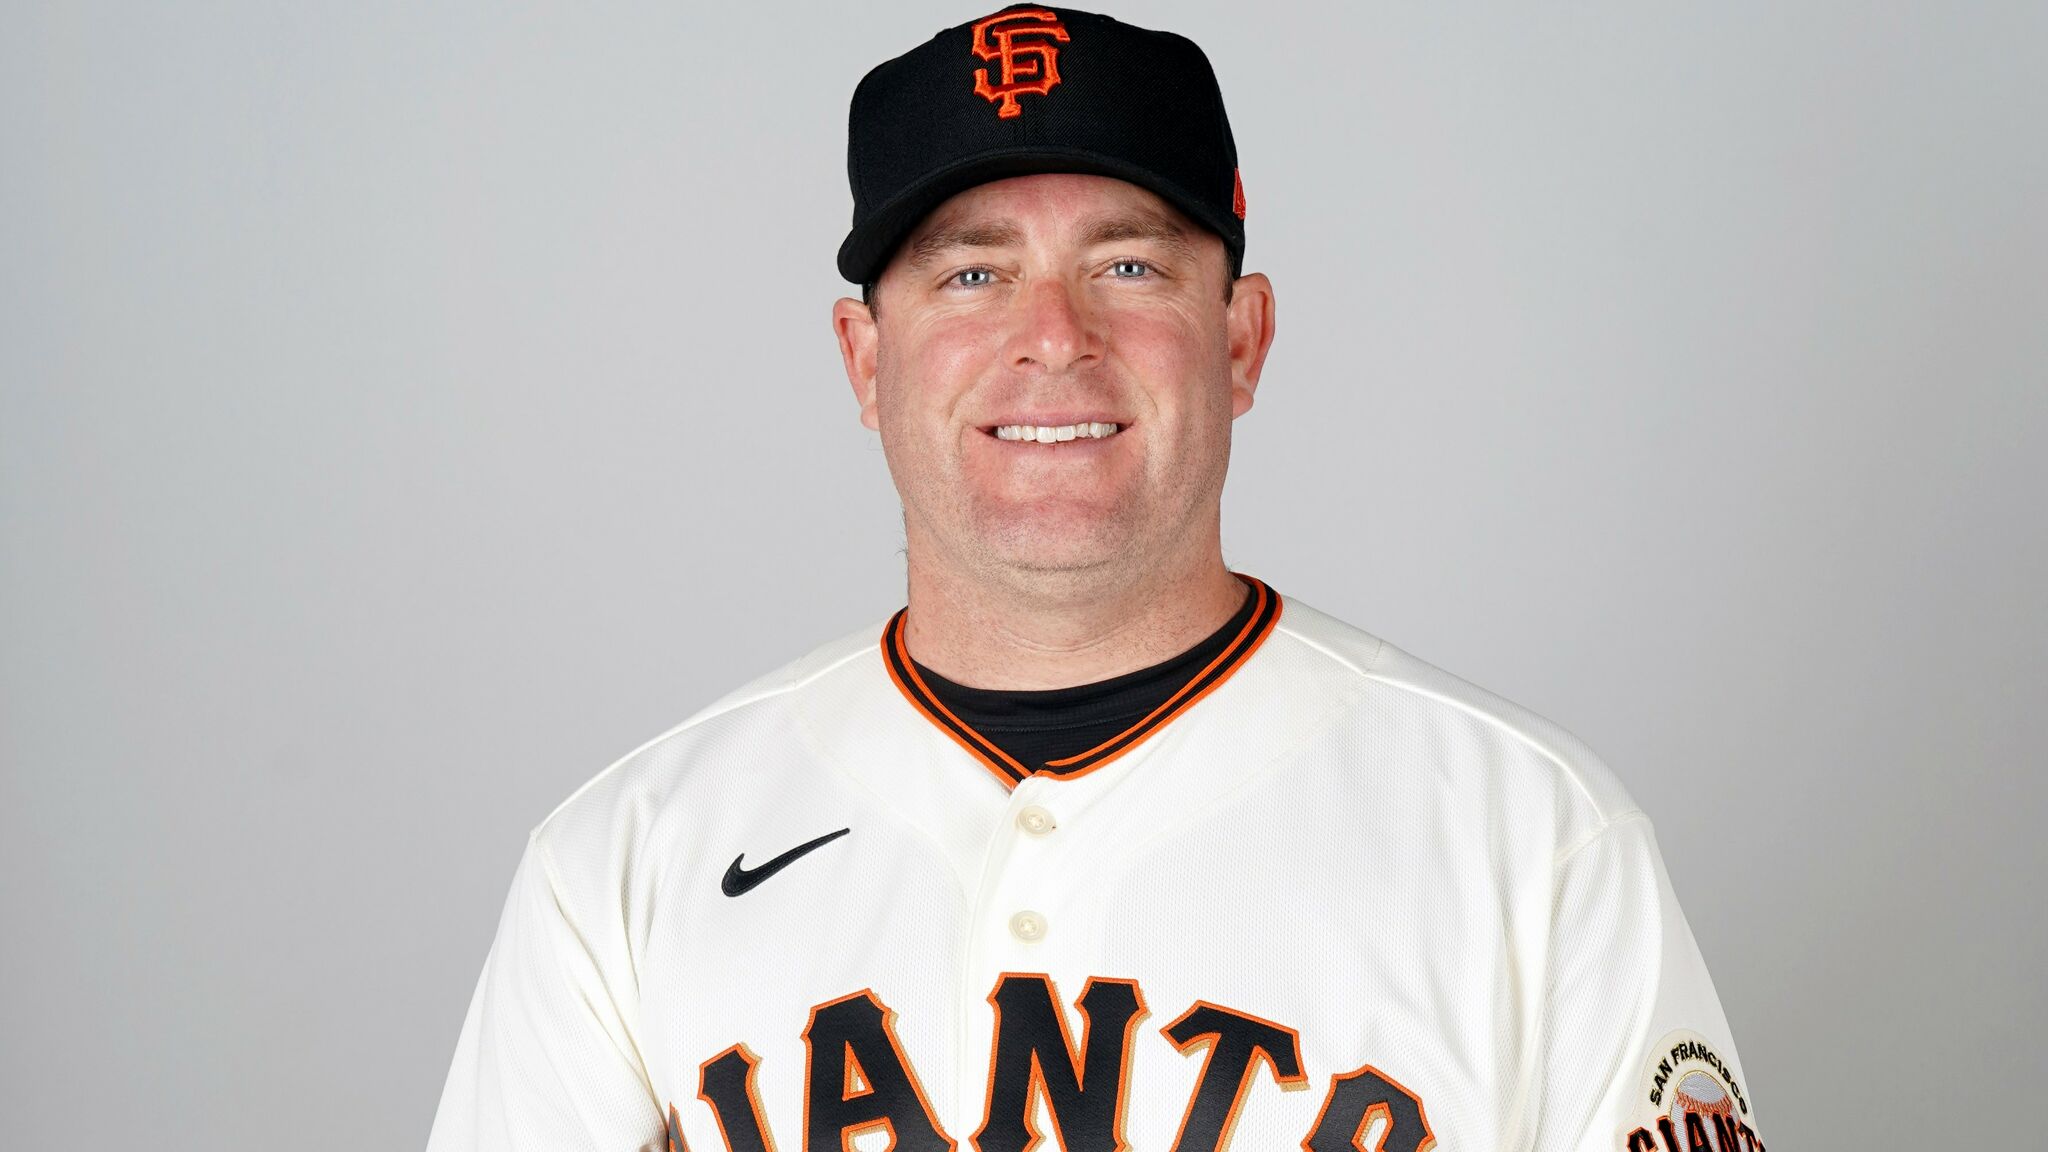 SF Giants have unvaccinated coach work all year